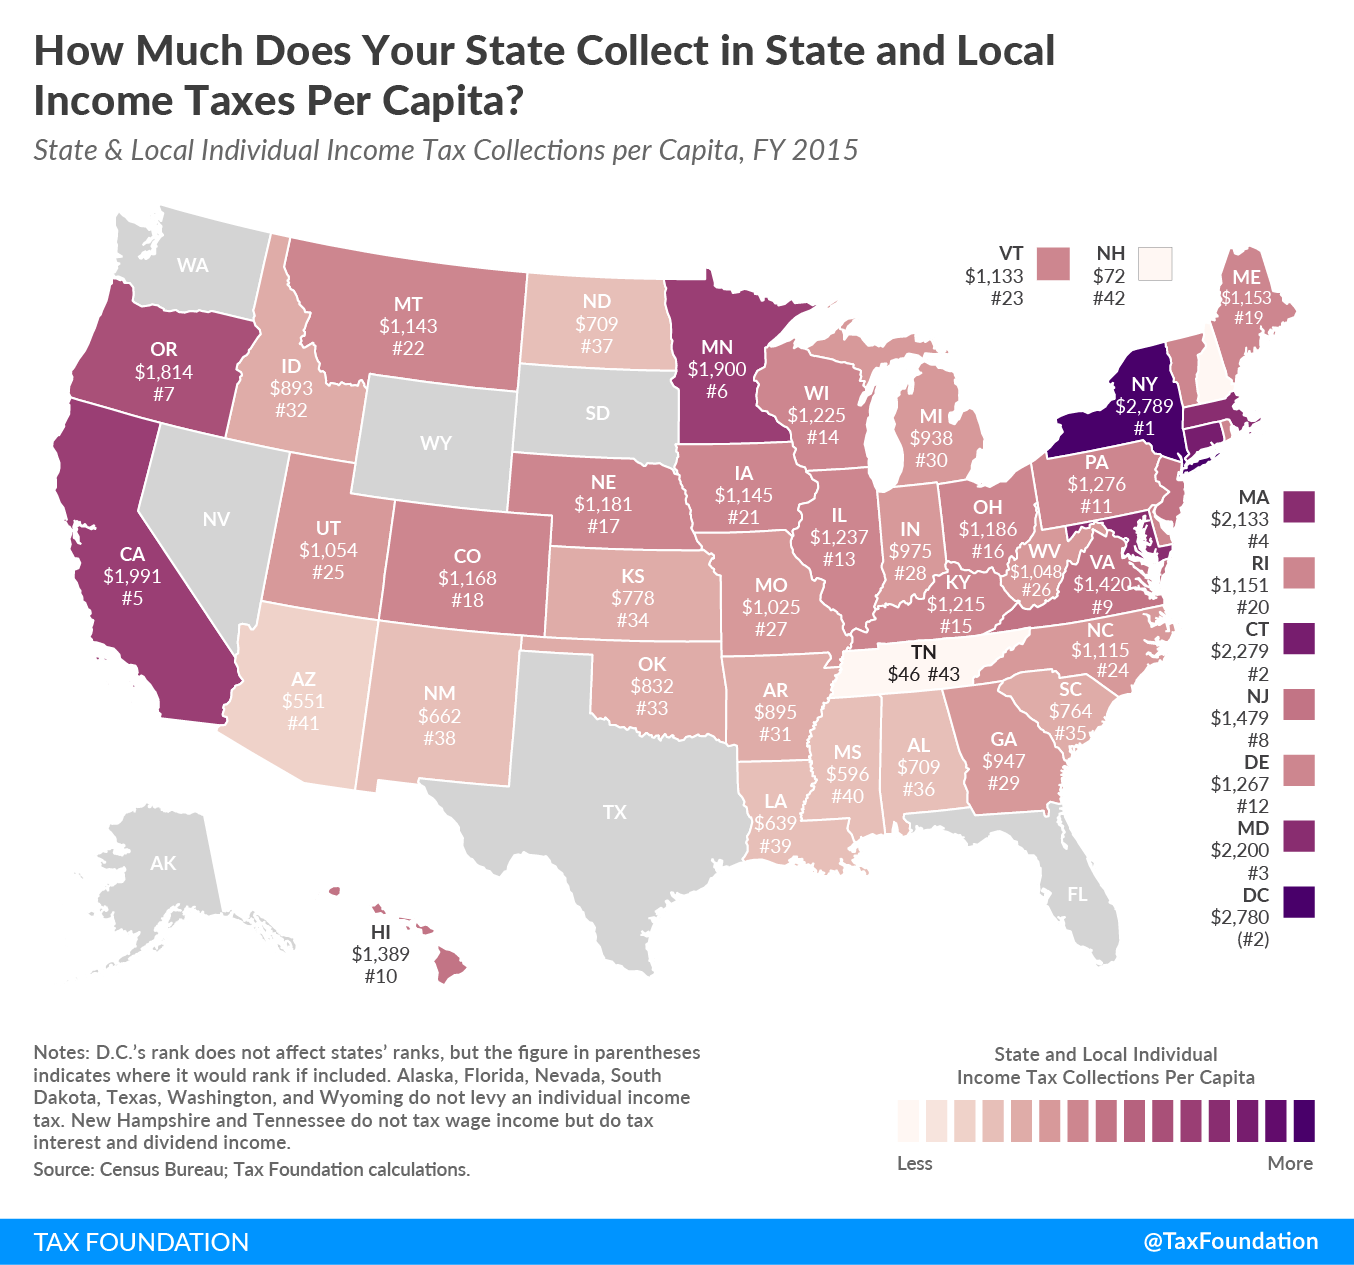 State and Local Individual Income Tax Collections Per Capita State Rankings